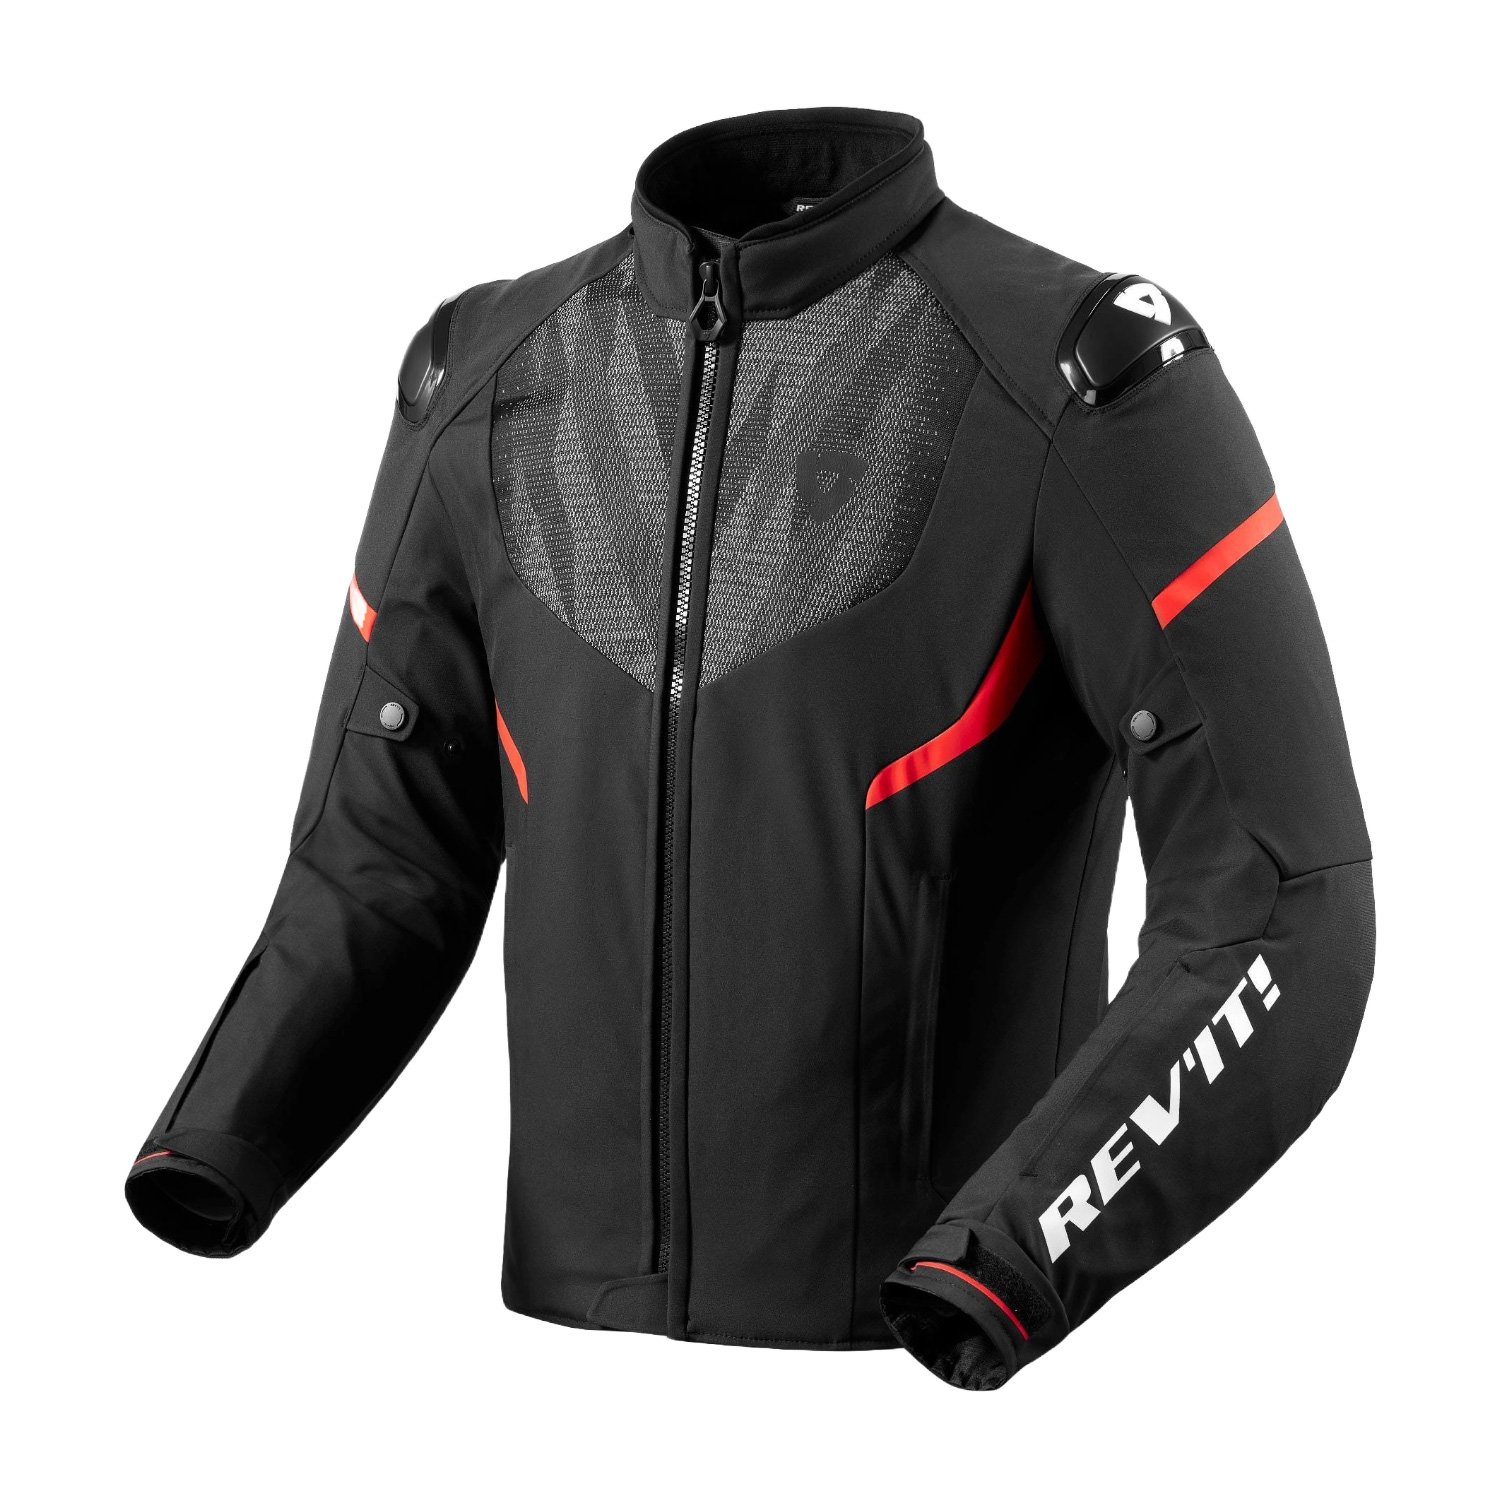 Image of REV'IT! Hyperspeed 2 H2O Jacket Black Neon Red Talla 2XL